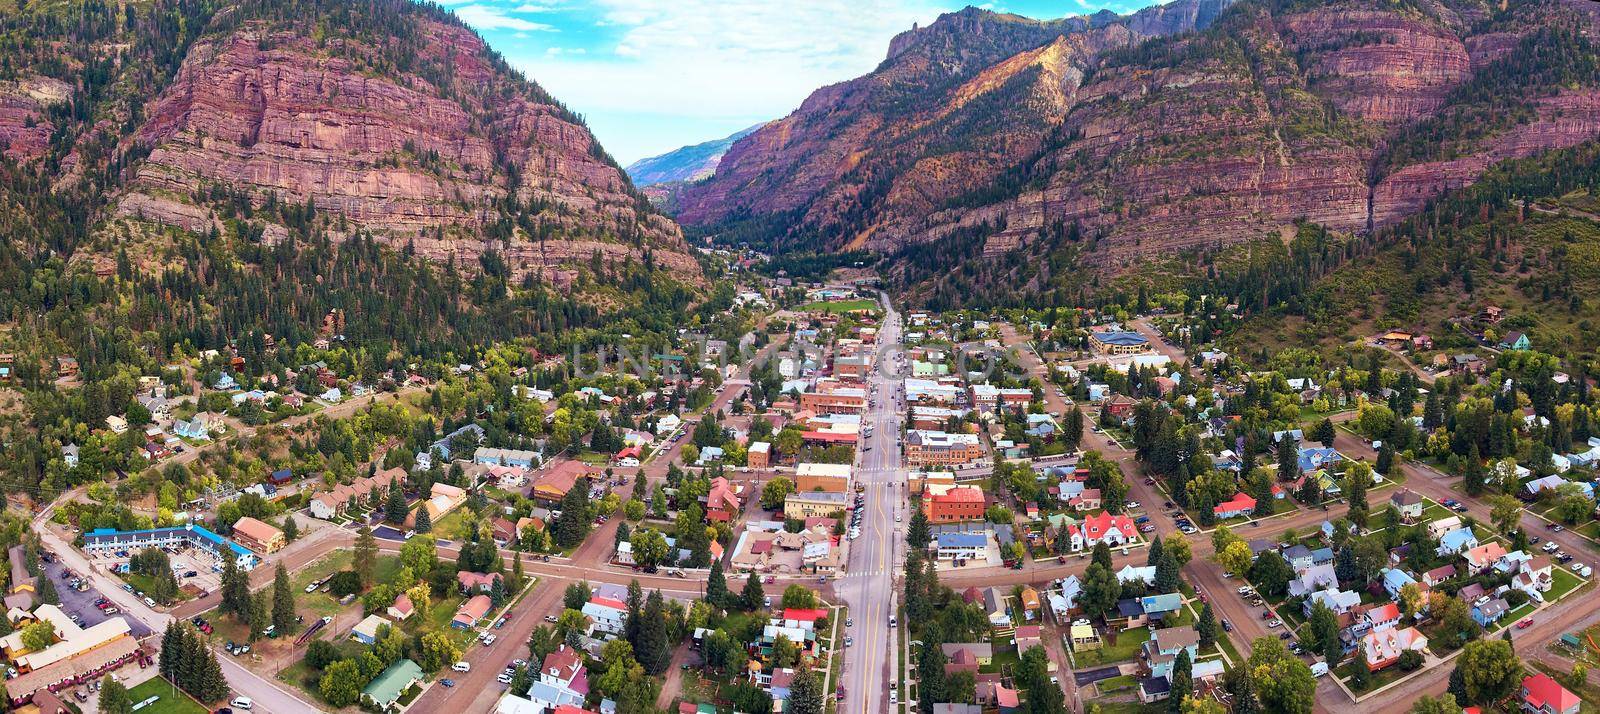 Panorama of quaint mountain town of Ouray in Colorado, USA by njproductions